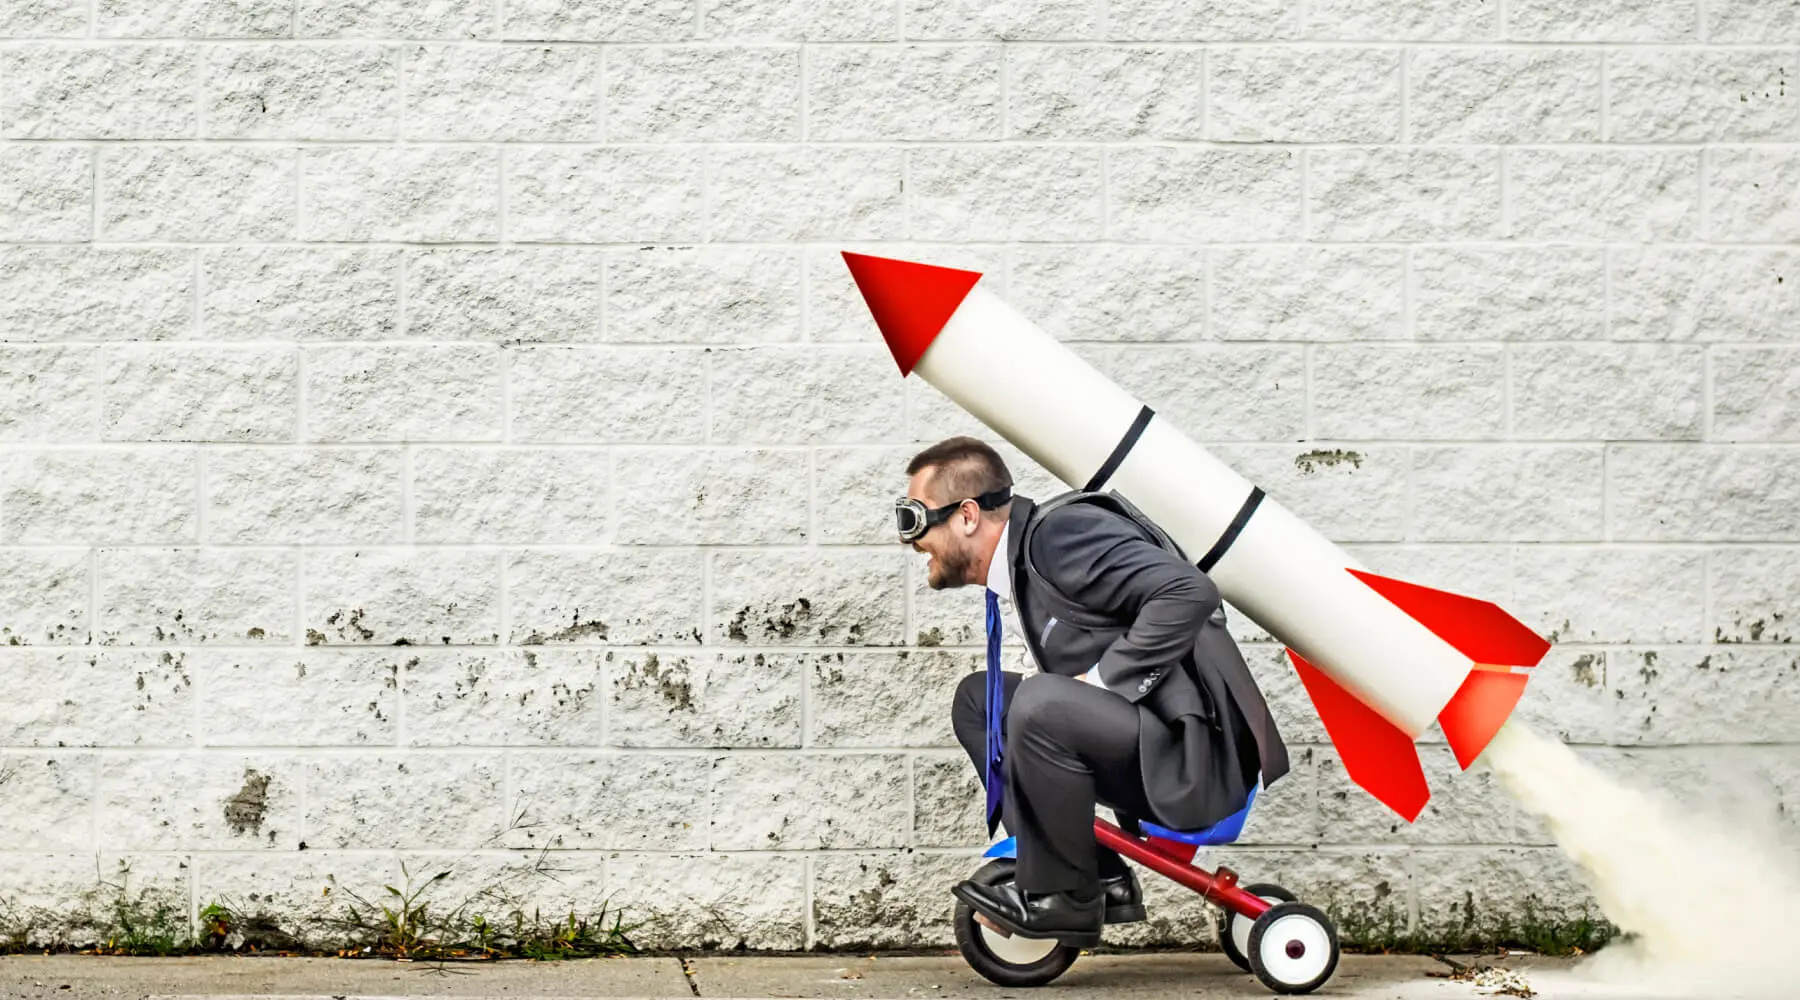 Man in suit riding a mini tricycle with a rocket on his back